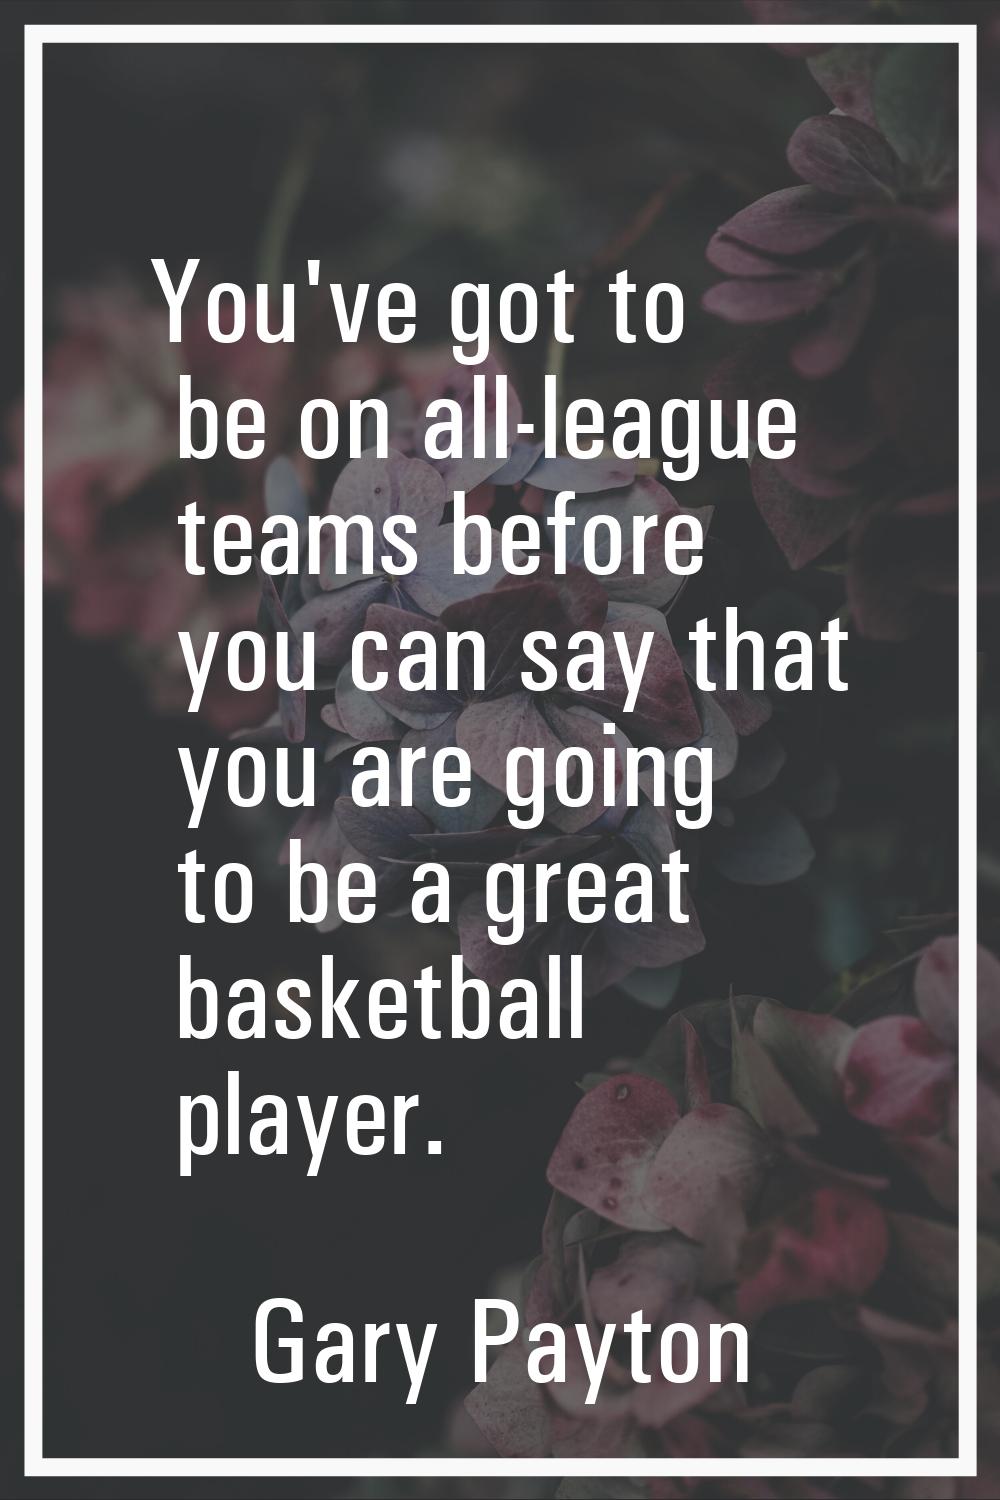 You've got to be on all-league teams before you can say that you are going to be a great basketball